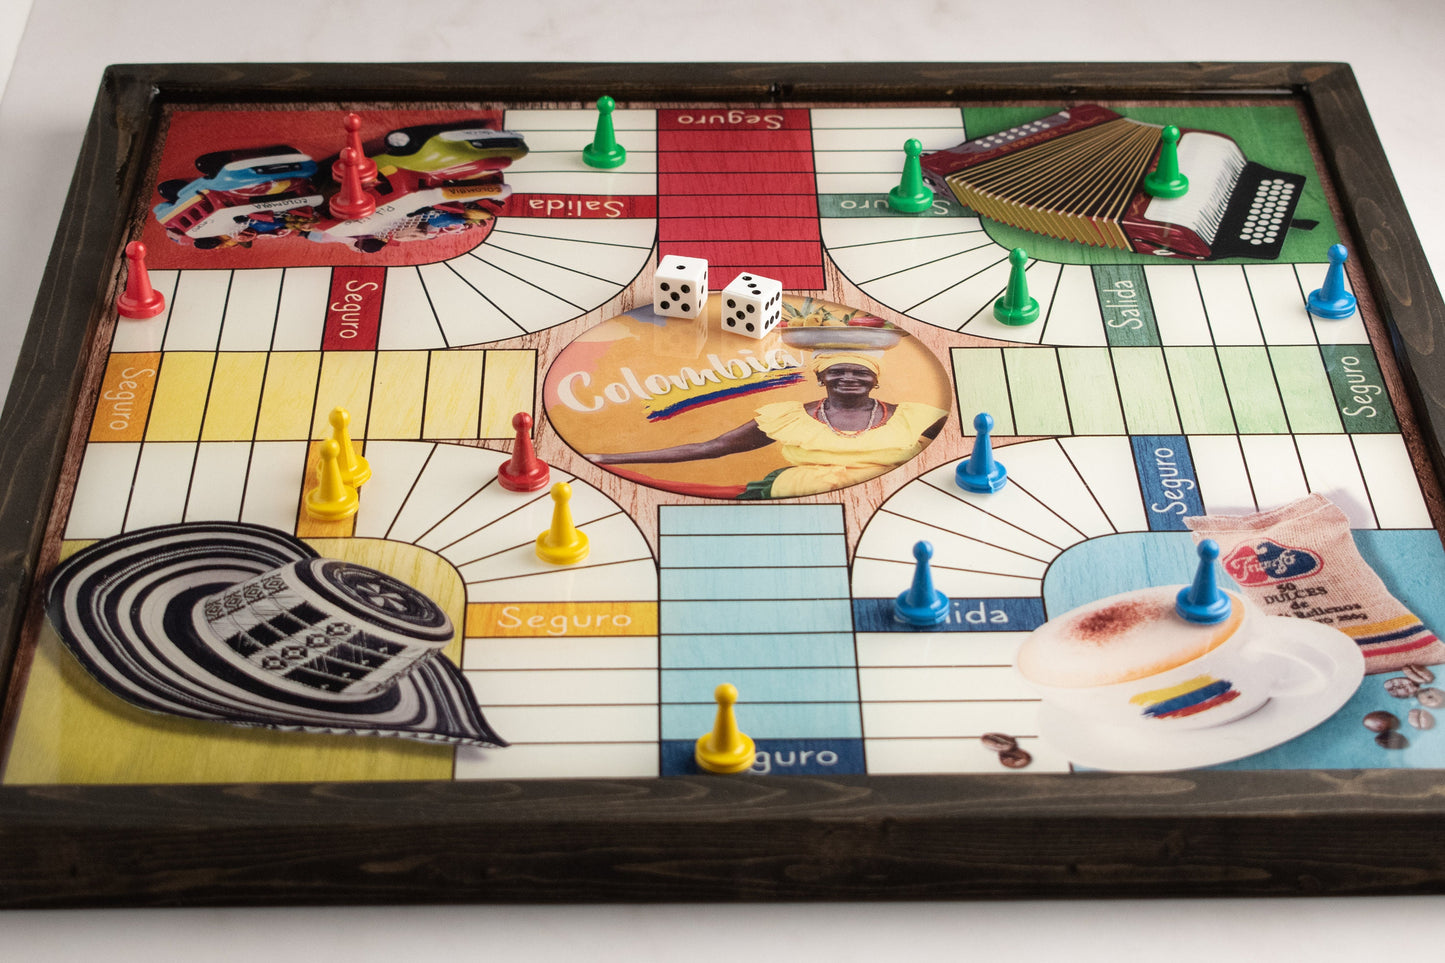 Parcheesi Board for 4 players - COLOMBIA CITIES BOARD. Hand Made with wood & Resin. Ready to Send. Natural Color